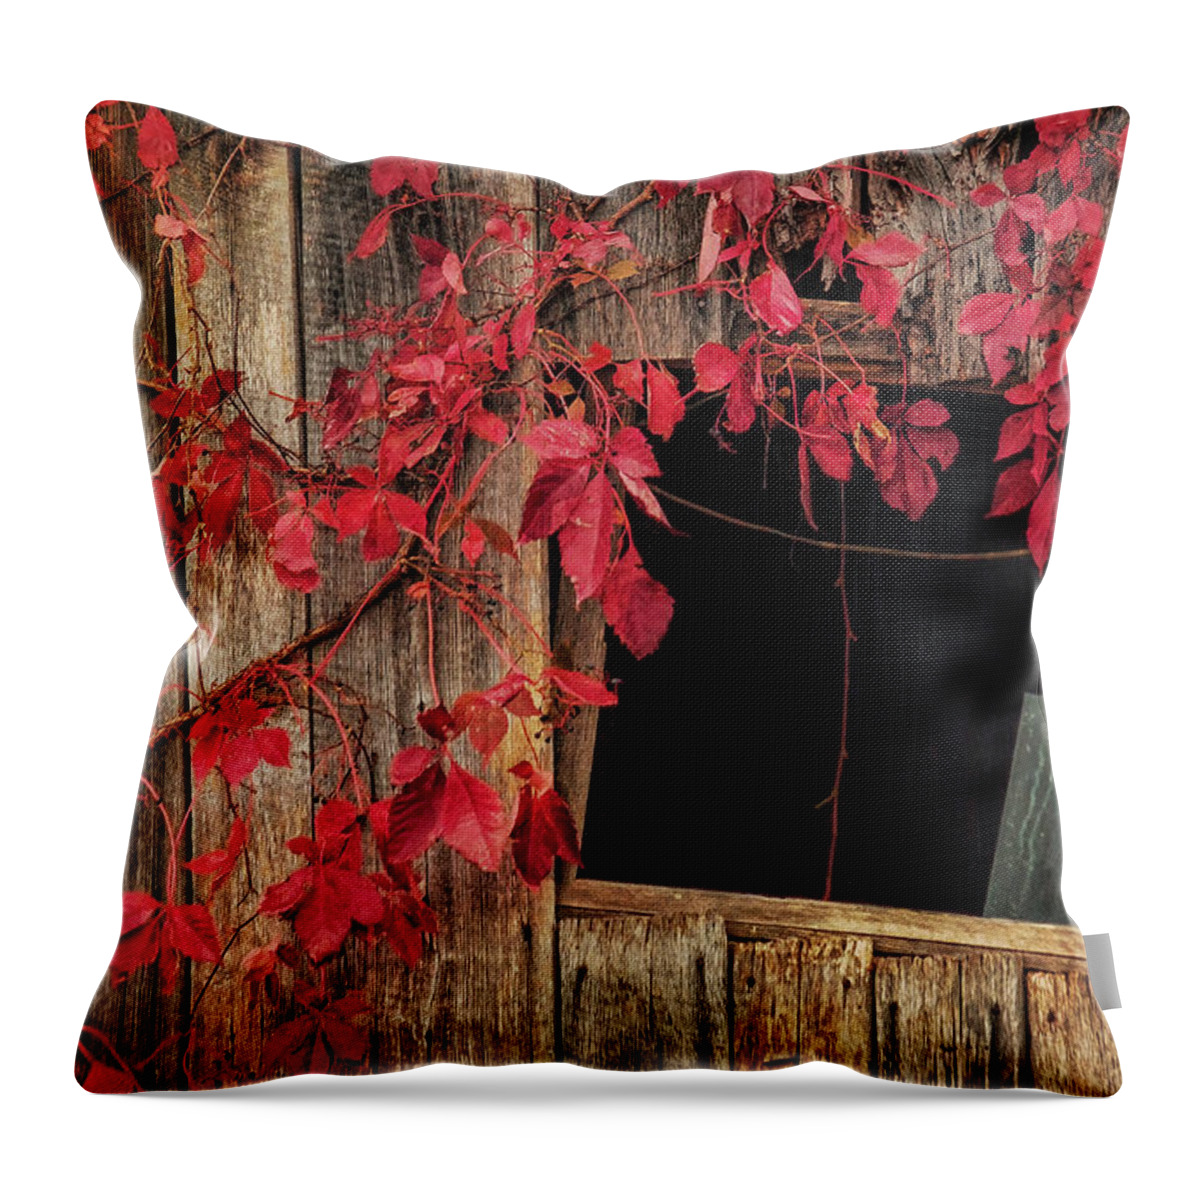 Built Structure Throw Pillow featuring the photograph Red Leaves On Barn Window by Melinda Moore